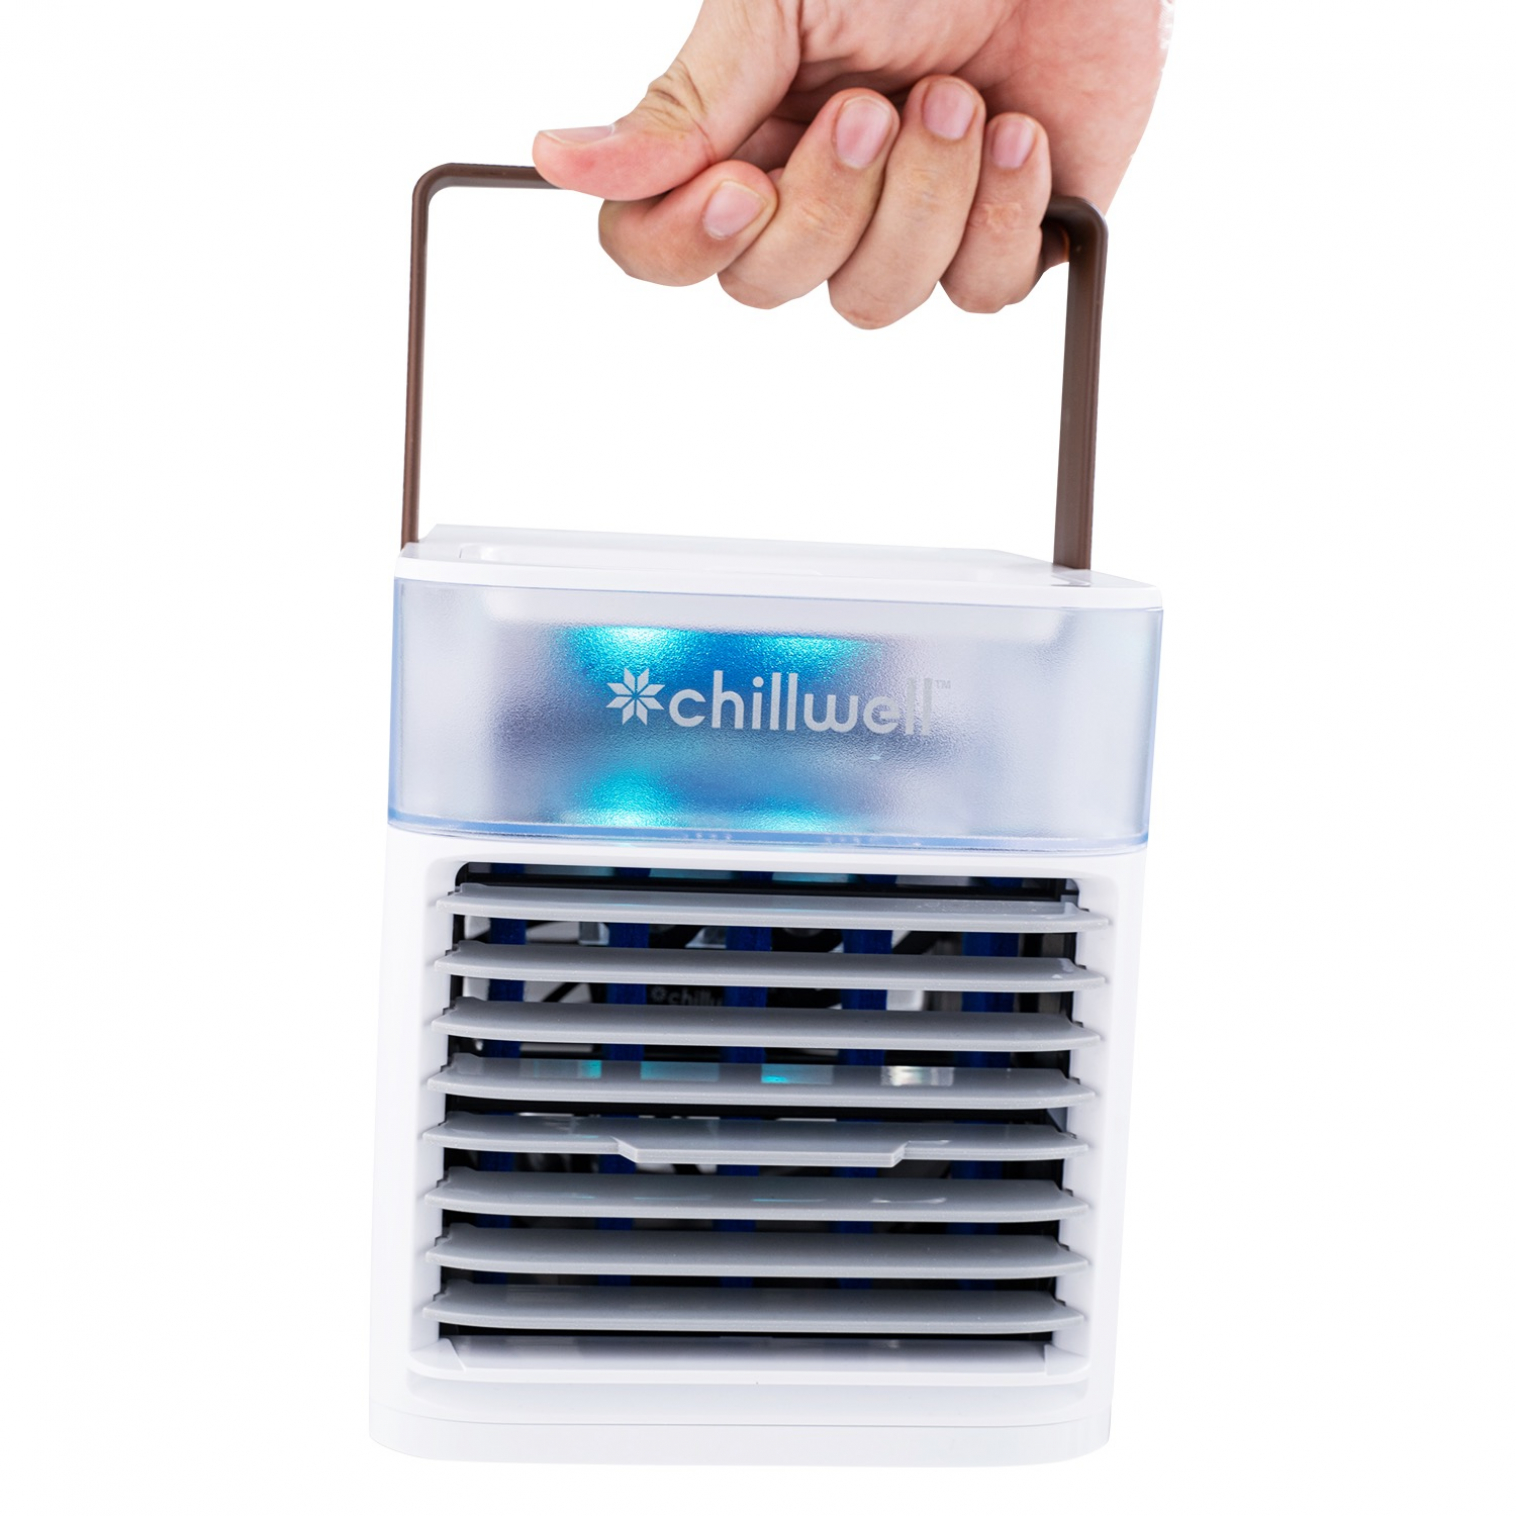 Chillwell AC Freedom Personal Air Cooler Reviews